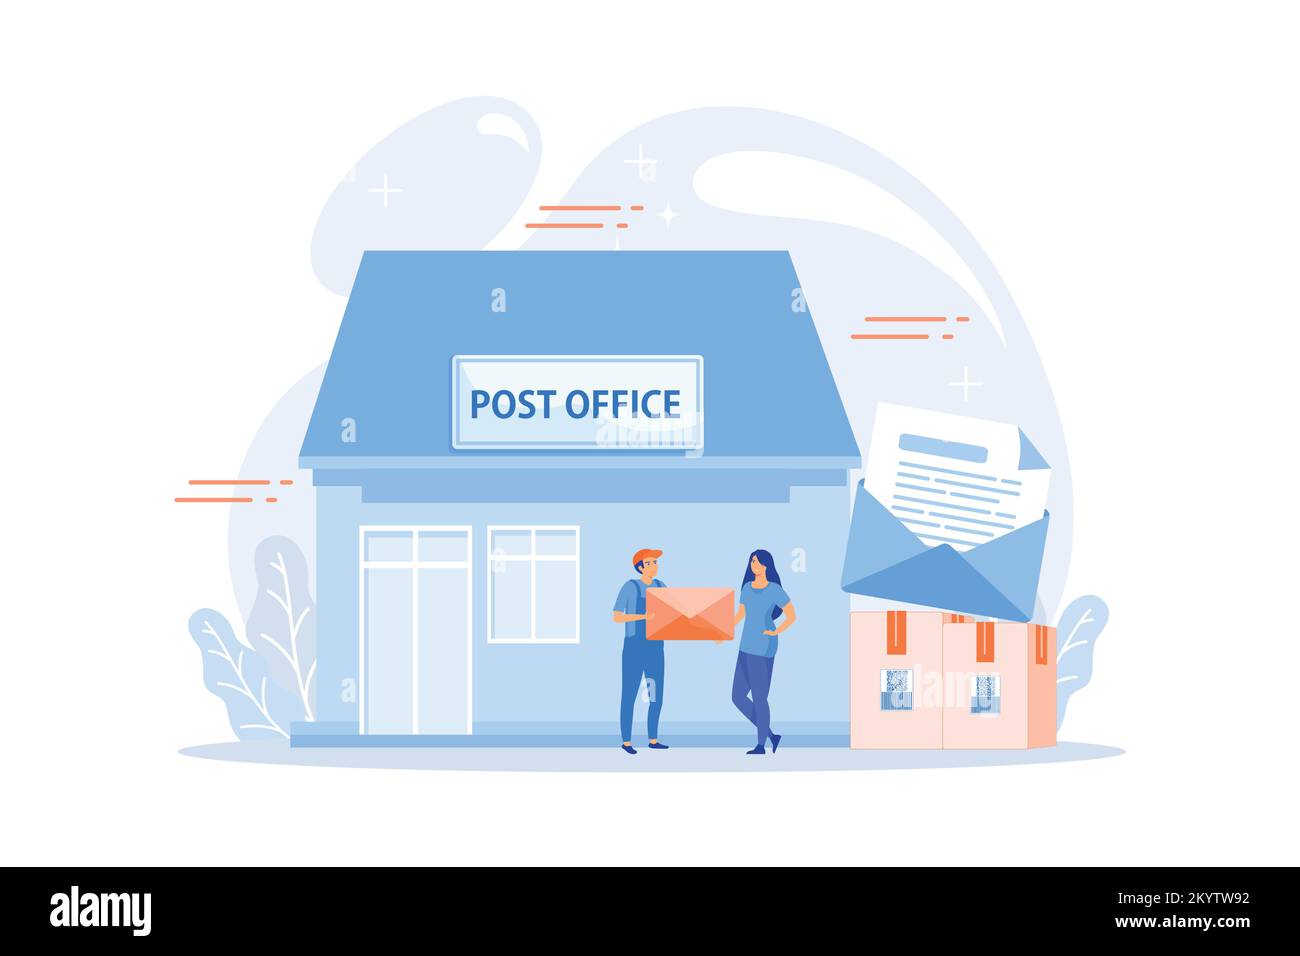 Documents, letters express courier delivering. Postal services. Post office services, post delivery agent, post office card accounts concept. flat vec Stock Vector